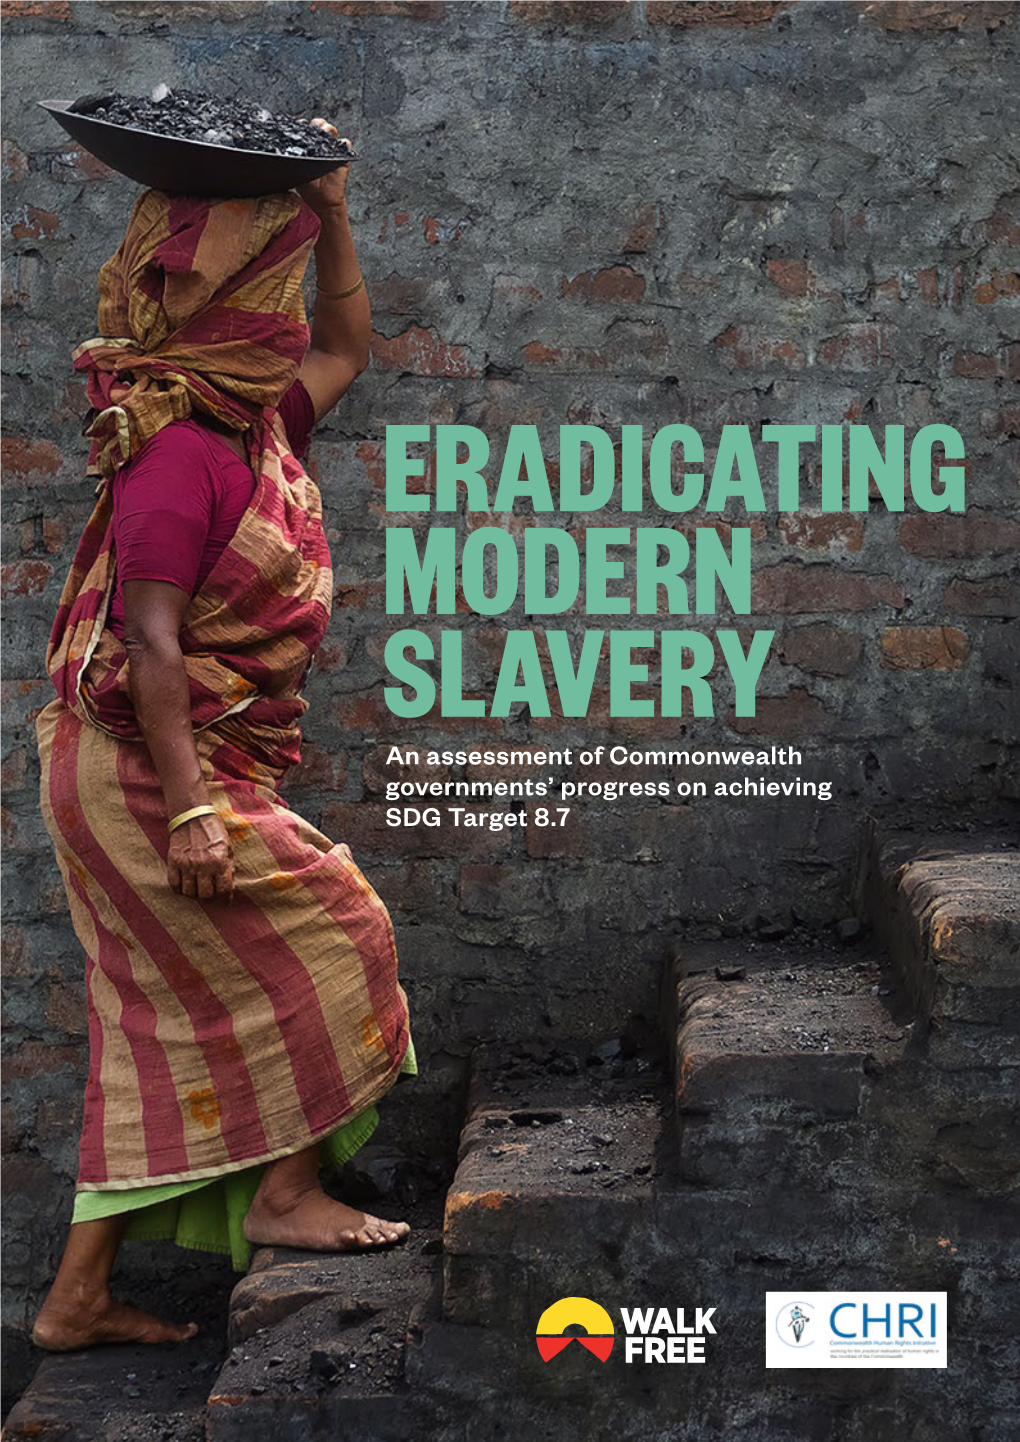 Eradicating Modern Slavery, an Assessment of Commonwealth Governments' Progress on Achieving SDG Target